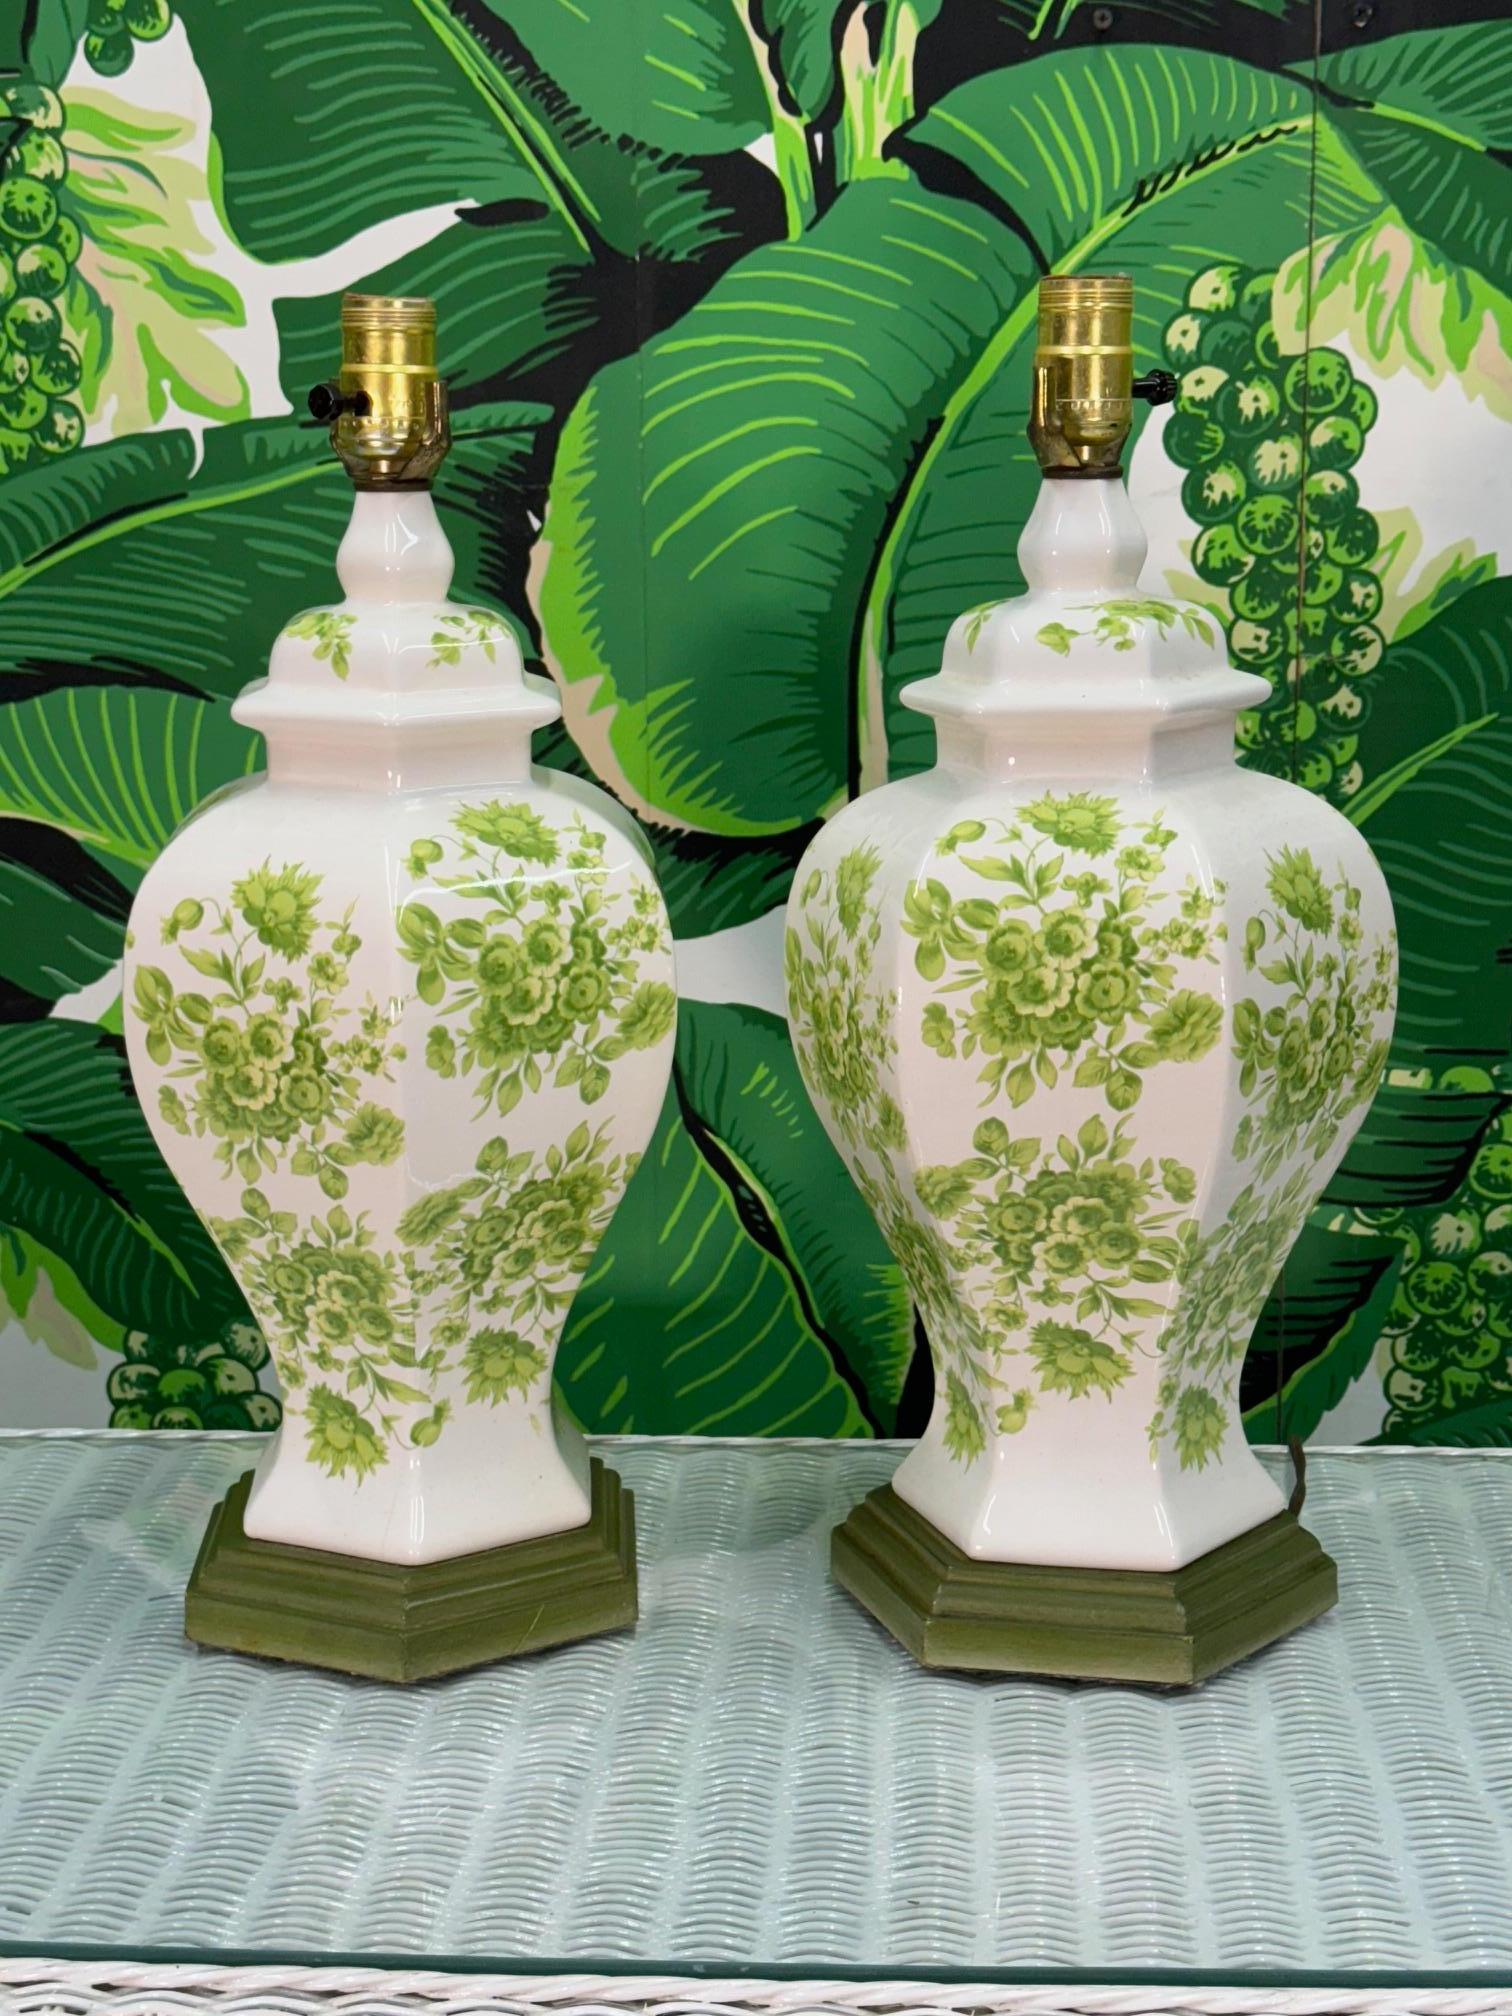 Pair of vintage ceramic table lamps feature hand painted vines and leaves and a bright glossy finish. Good condition with minor imperfections consistent with age, see photos for condition details.
For a shipping quote to your exact zip code, please